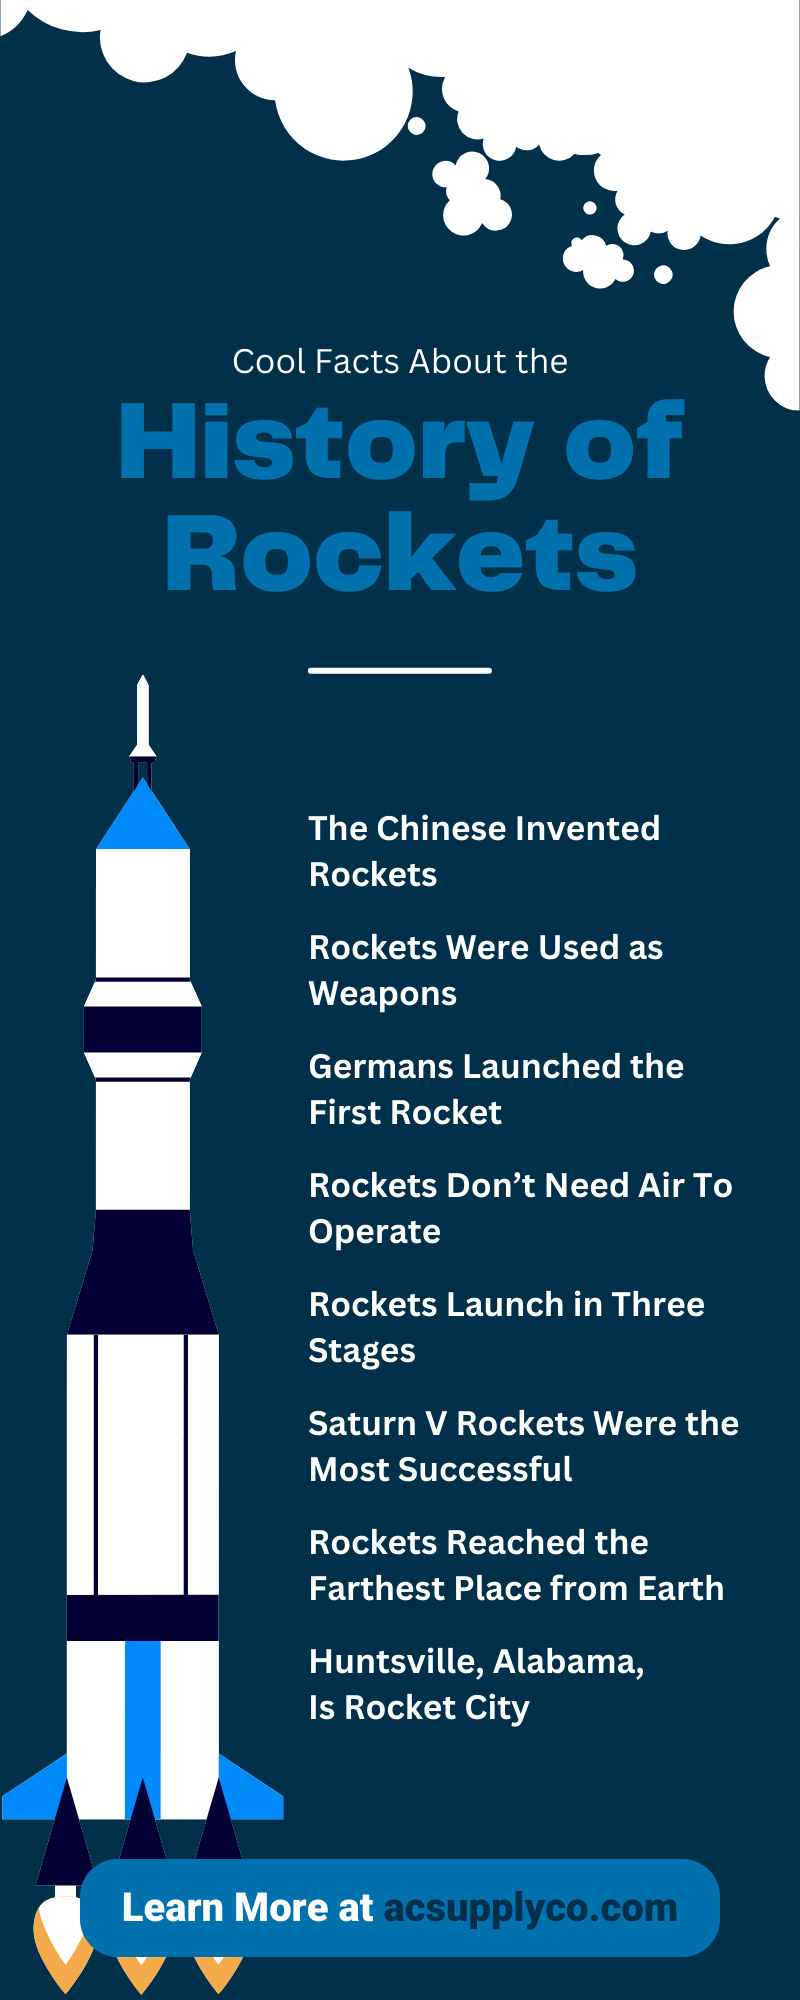 8 Cool Facts About the History of Rockets